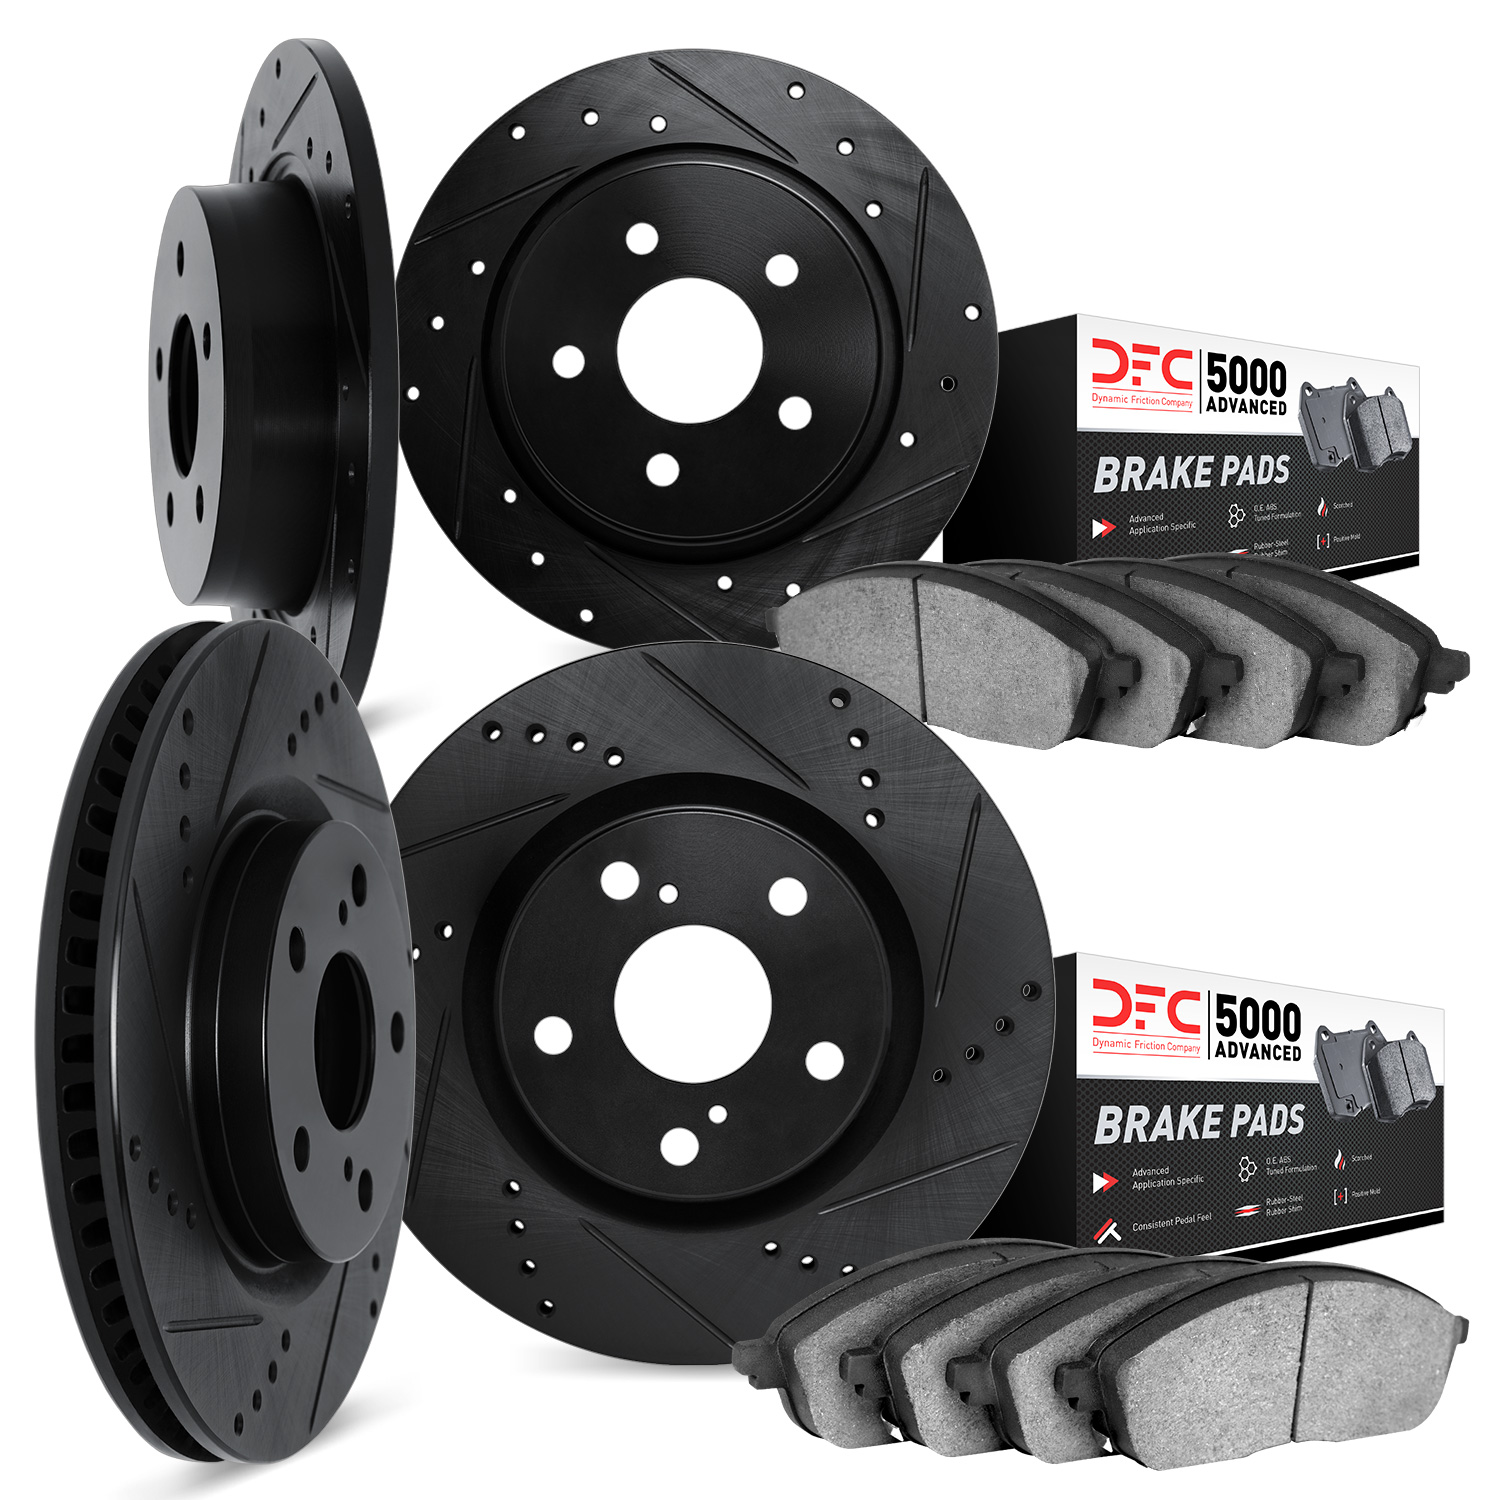 8504-65005 Drilled/Slotted Brake Rotors w/5000 Advanced Brake Pads Kit [Black], 2003-2003 GM, Position: Front and Rear